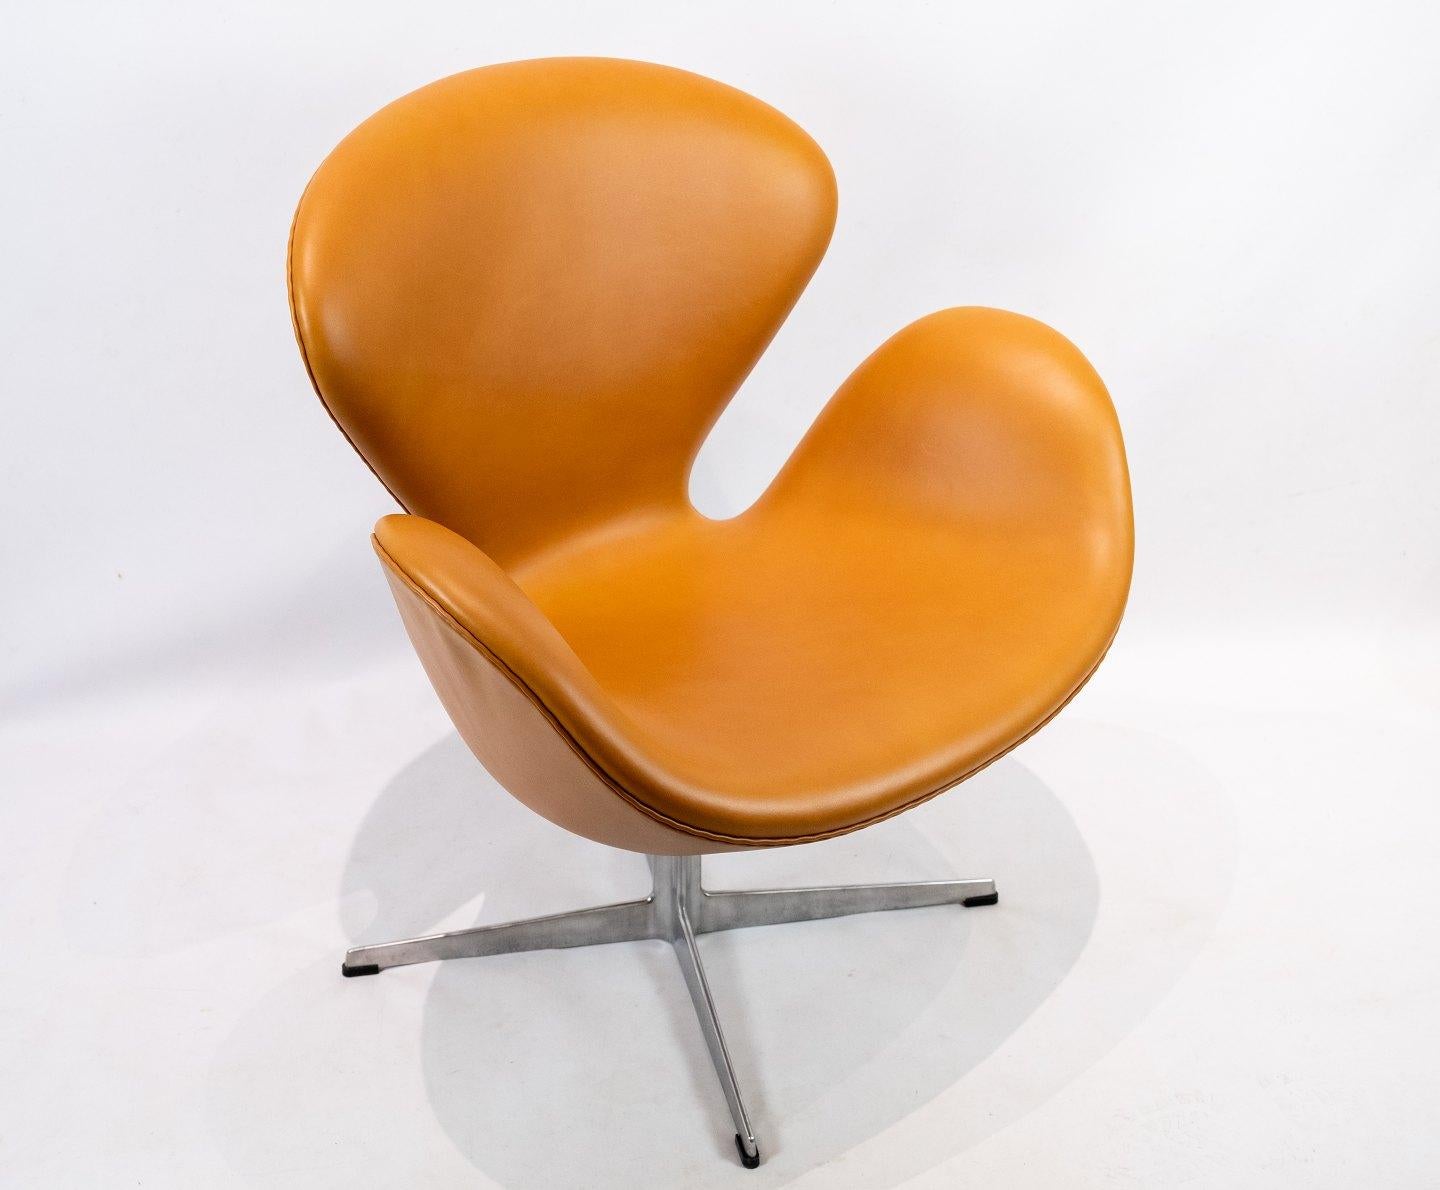 Swan chair, model 3320, designed by Arne Jacobsen in 1958 and manufactured by Fritz Hansen in the late 1950s. The chair is upholstered in cognac colored leather.
  